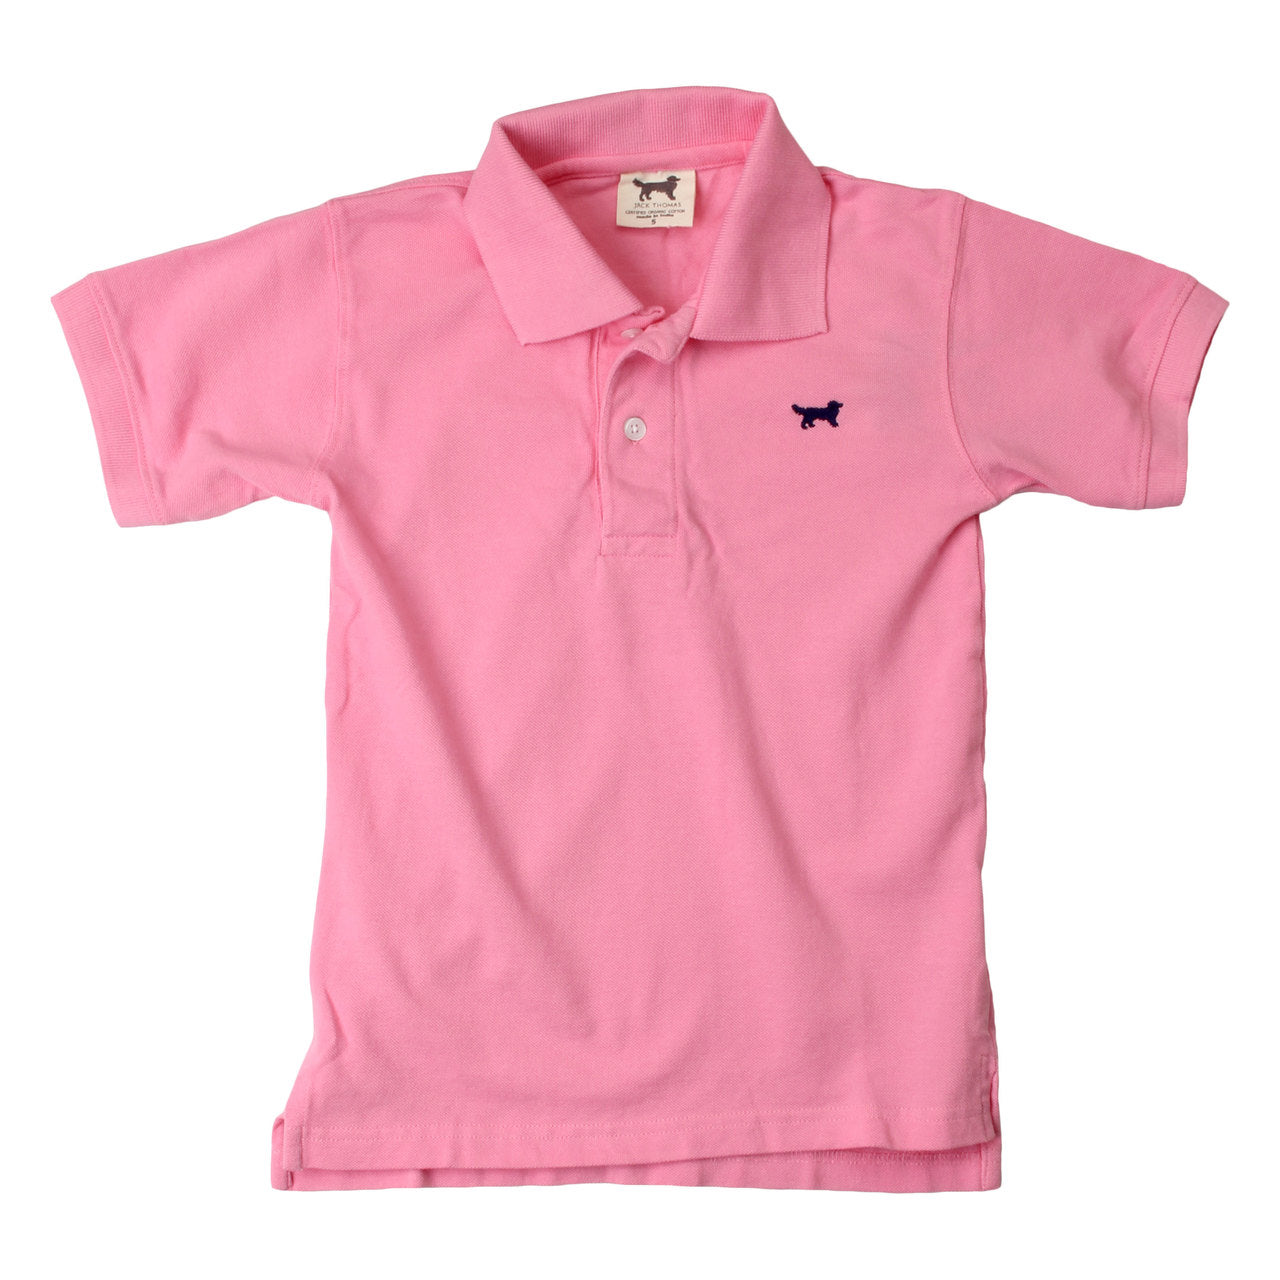 Wes & Willy Classic Short Sleeve Pique Polo/Passion